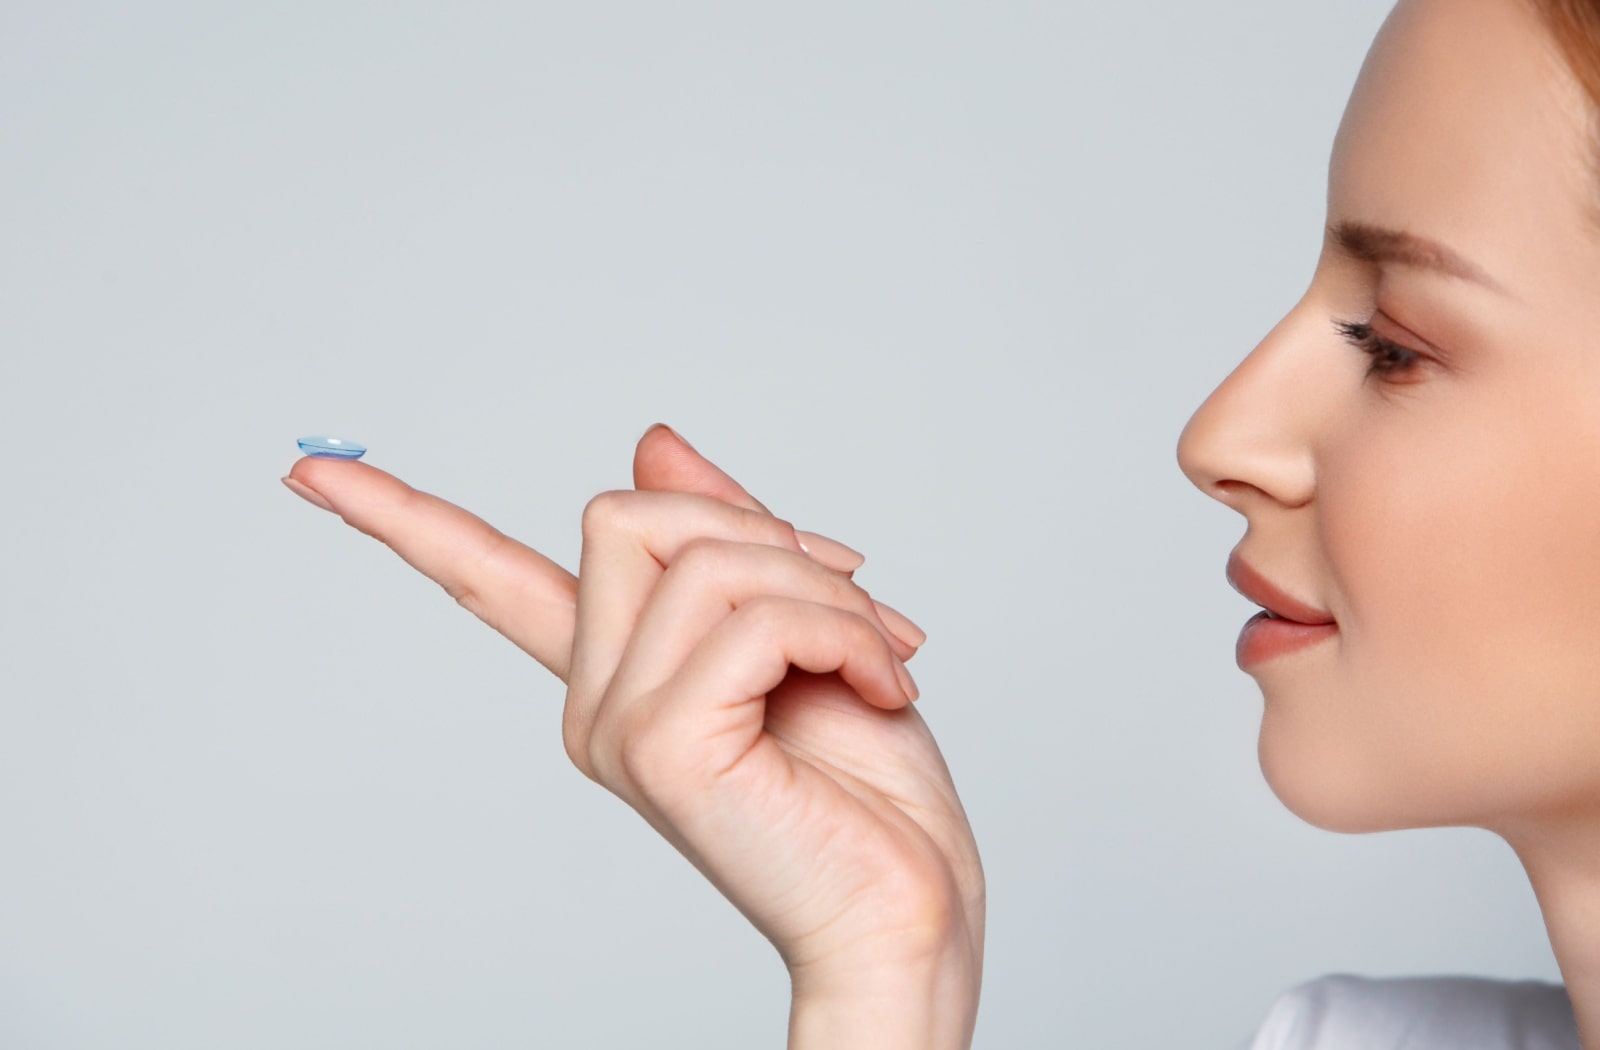 A woman holding out a contact lens on her index finger